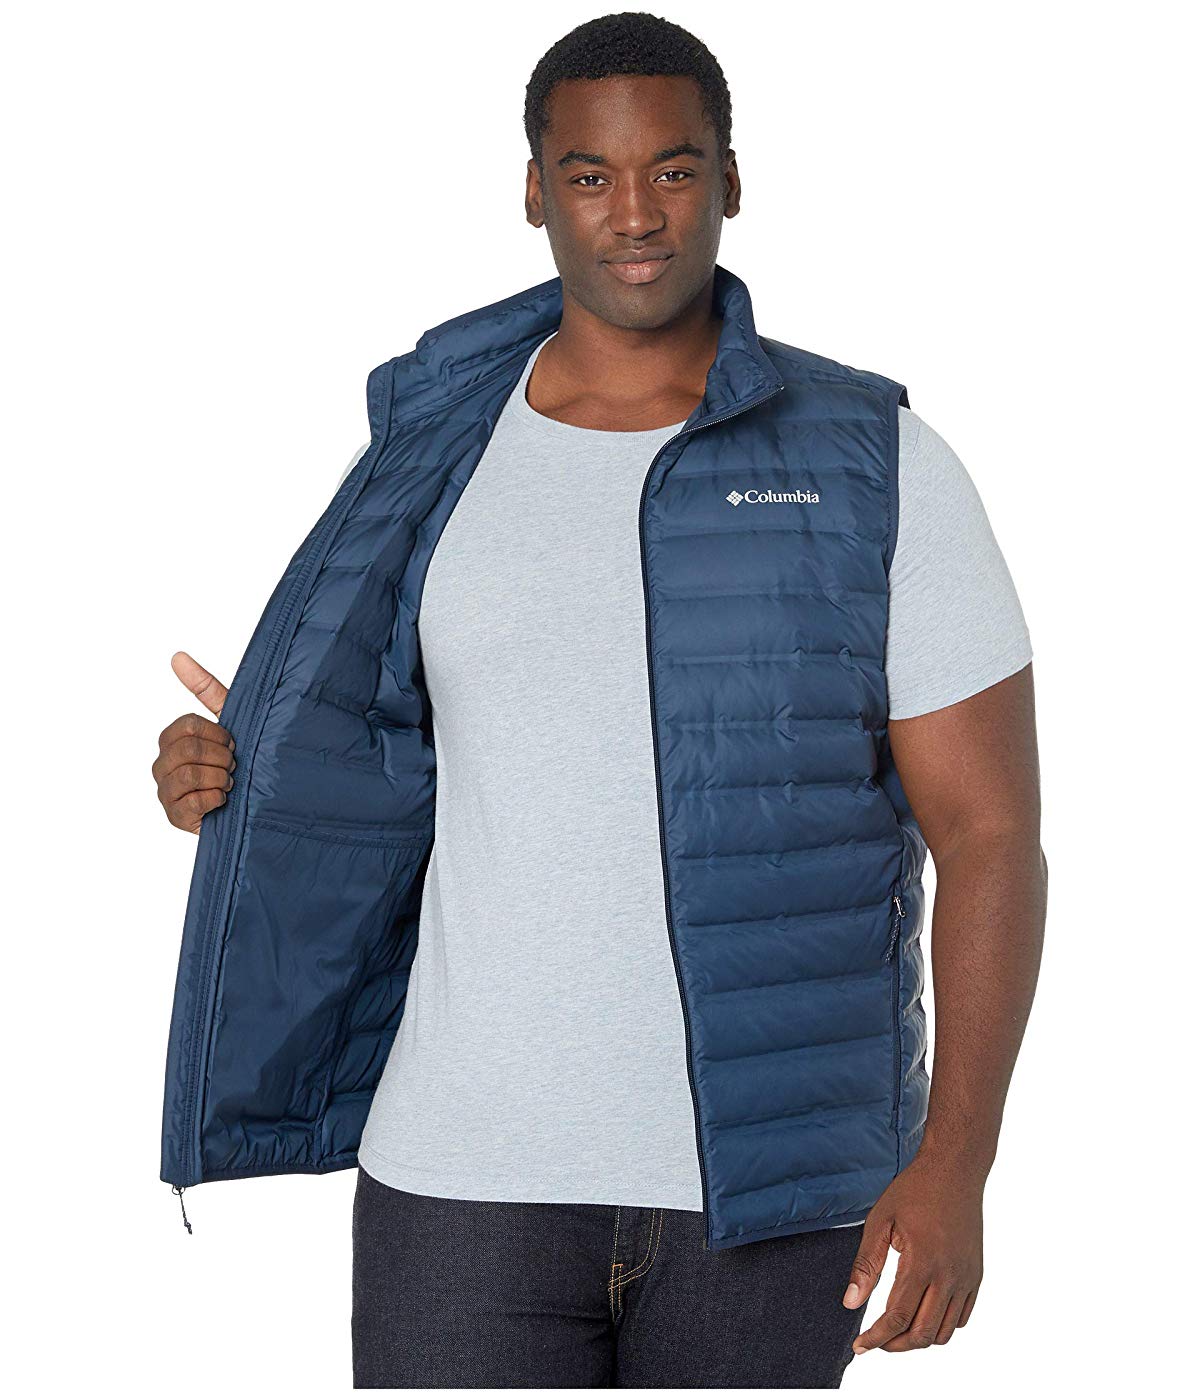 Columbia Big & Tall Lake 22 Down Vest Collegiate Navy - image 4 of 4